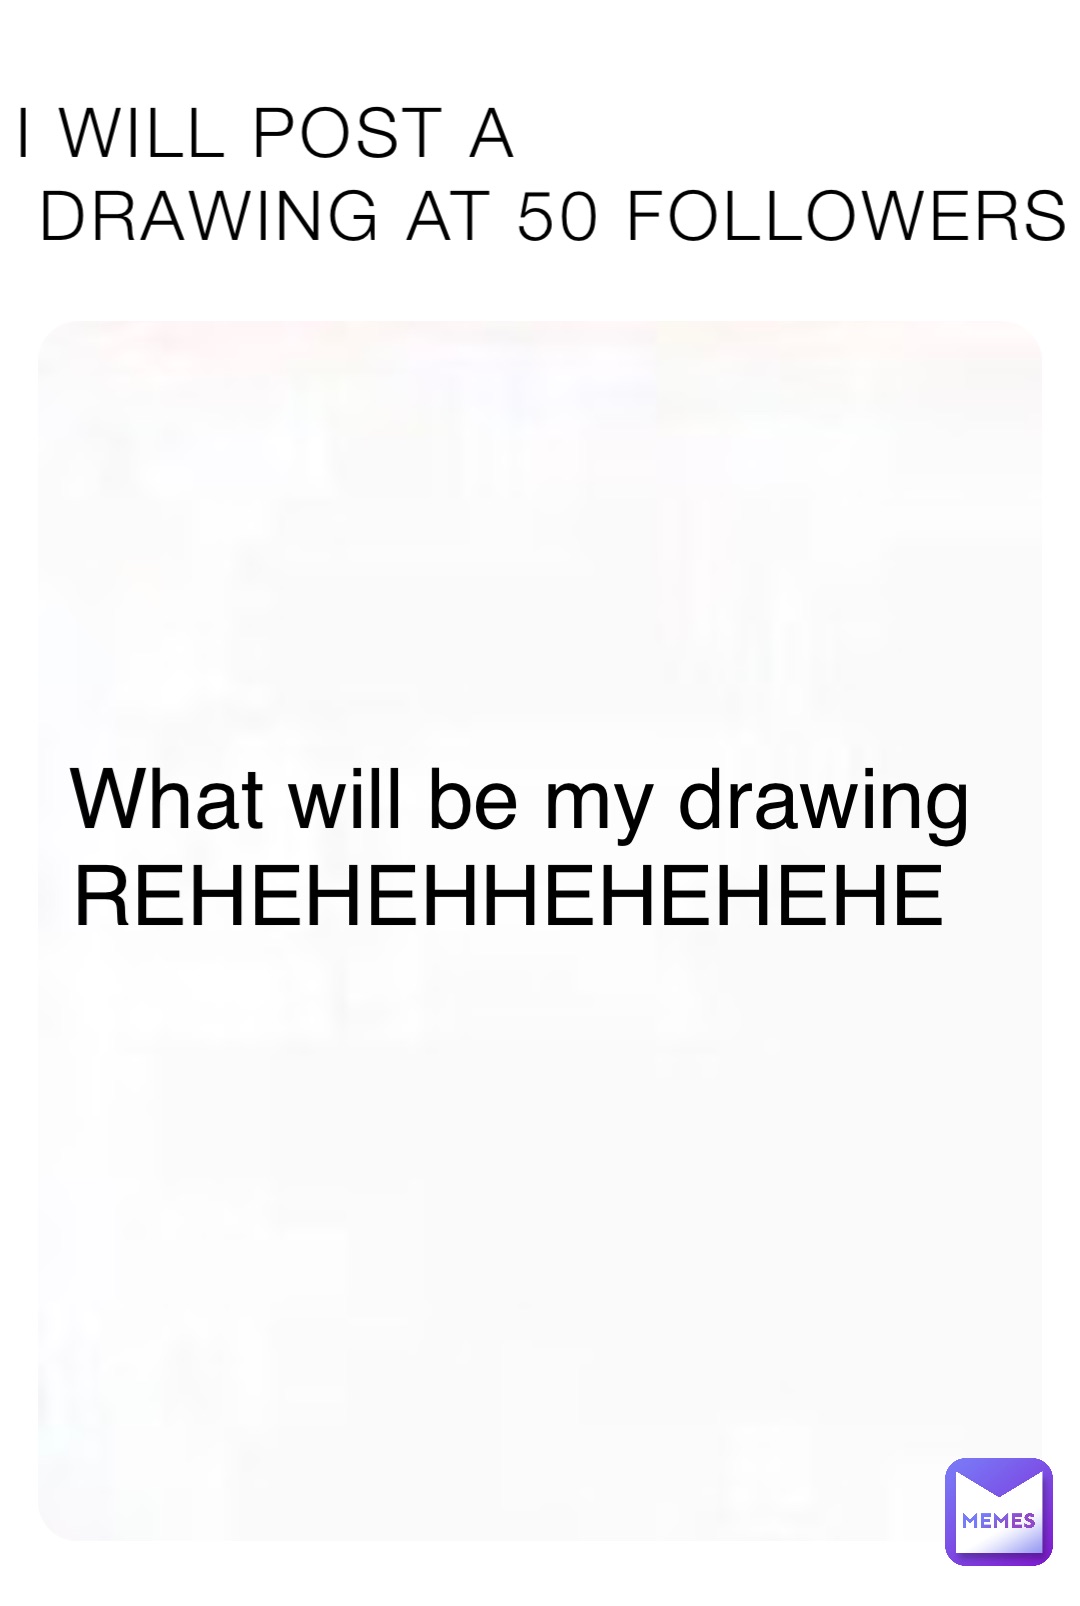 I WILL POST A
 DRAWING AT 50 FOLLOWERS What will be my drawing REHEHEHHEHEHEHE